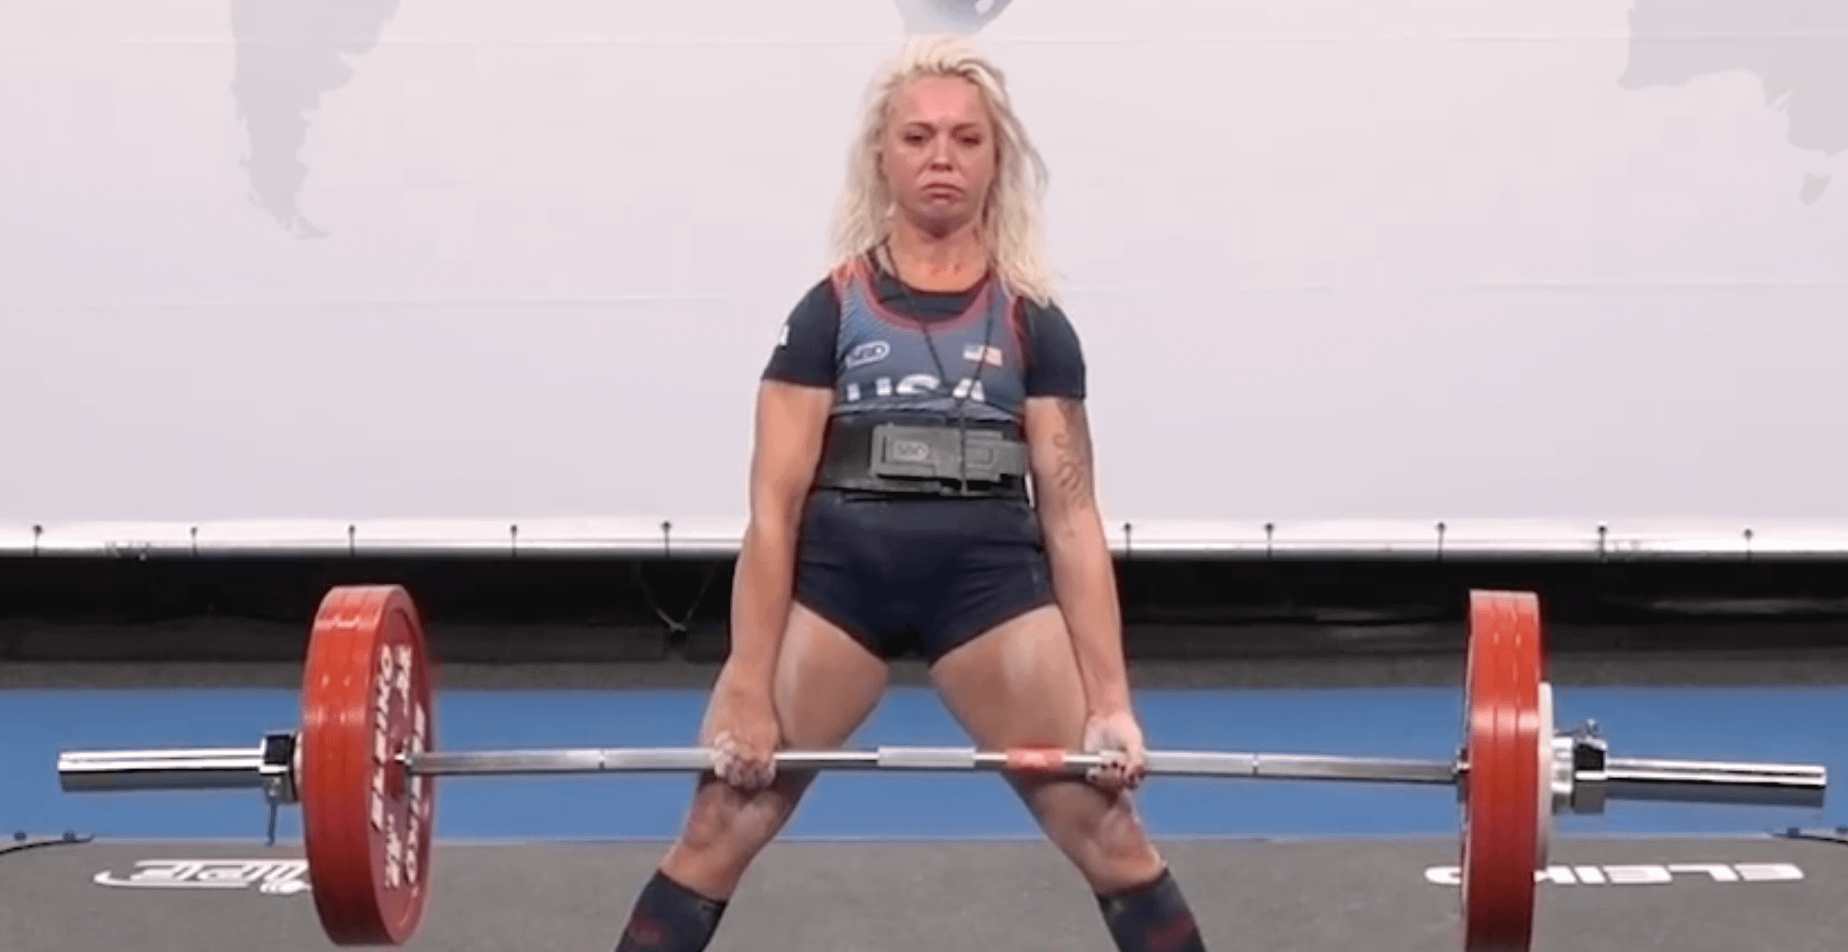 Heather Connor (47KG) Breaks Deadlift World Record With 185-Kilogram Pull At 2022 IPF World Championships